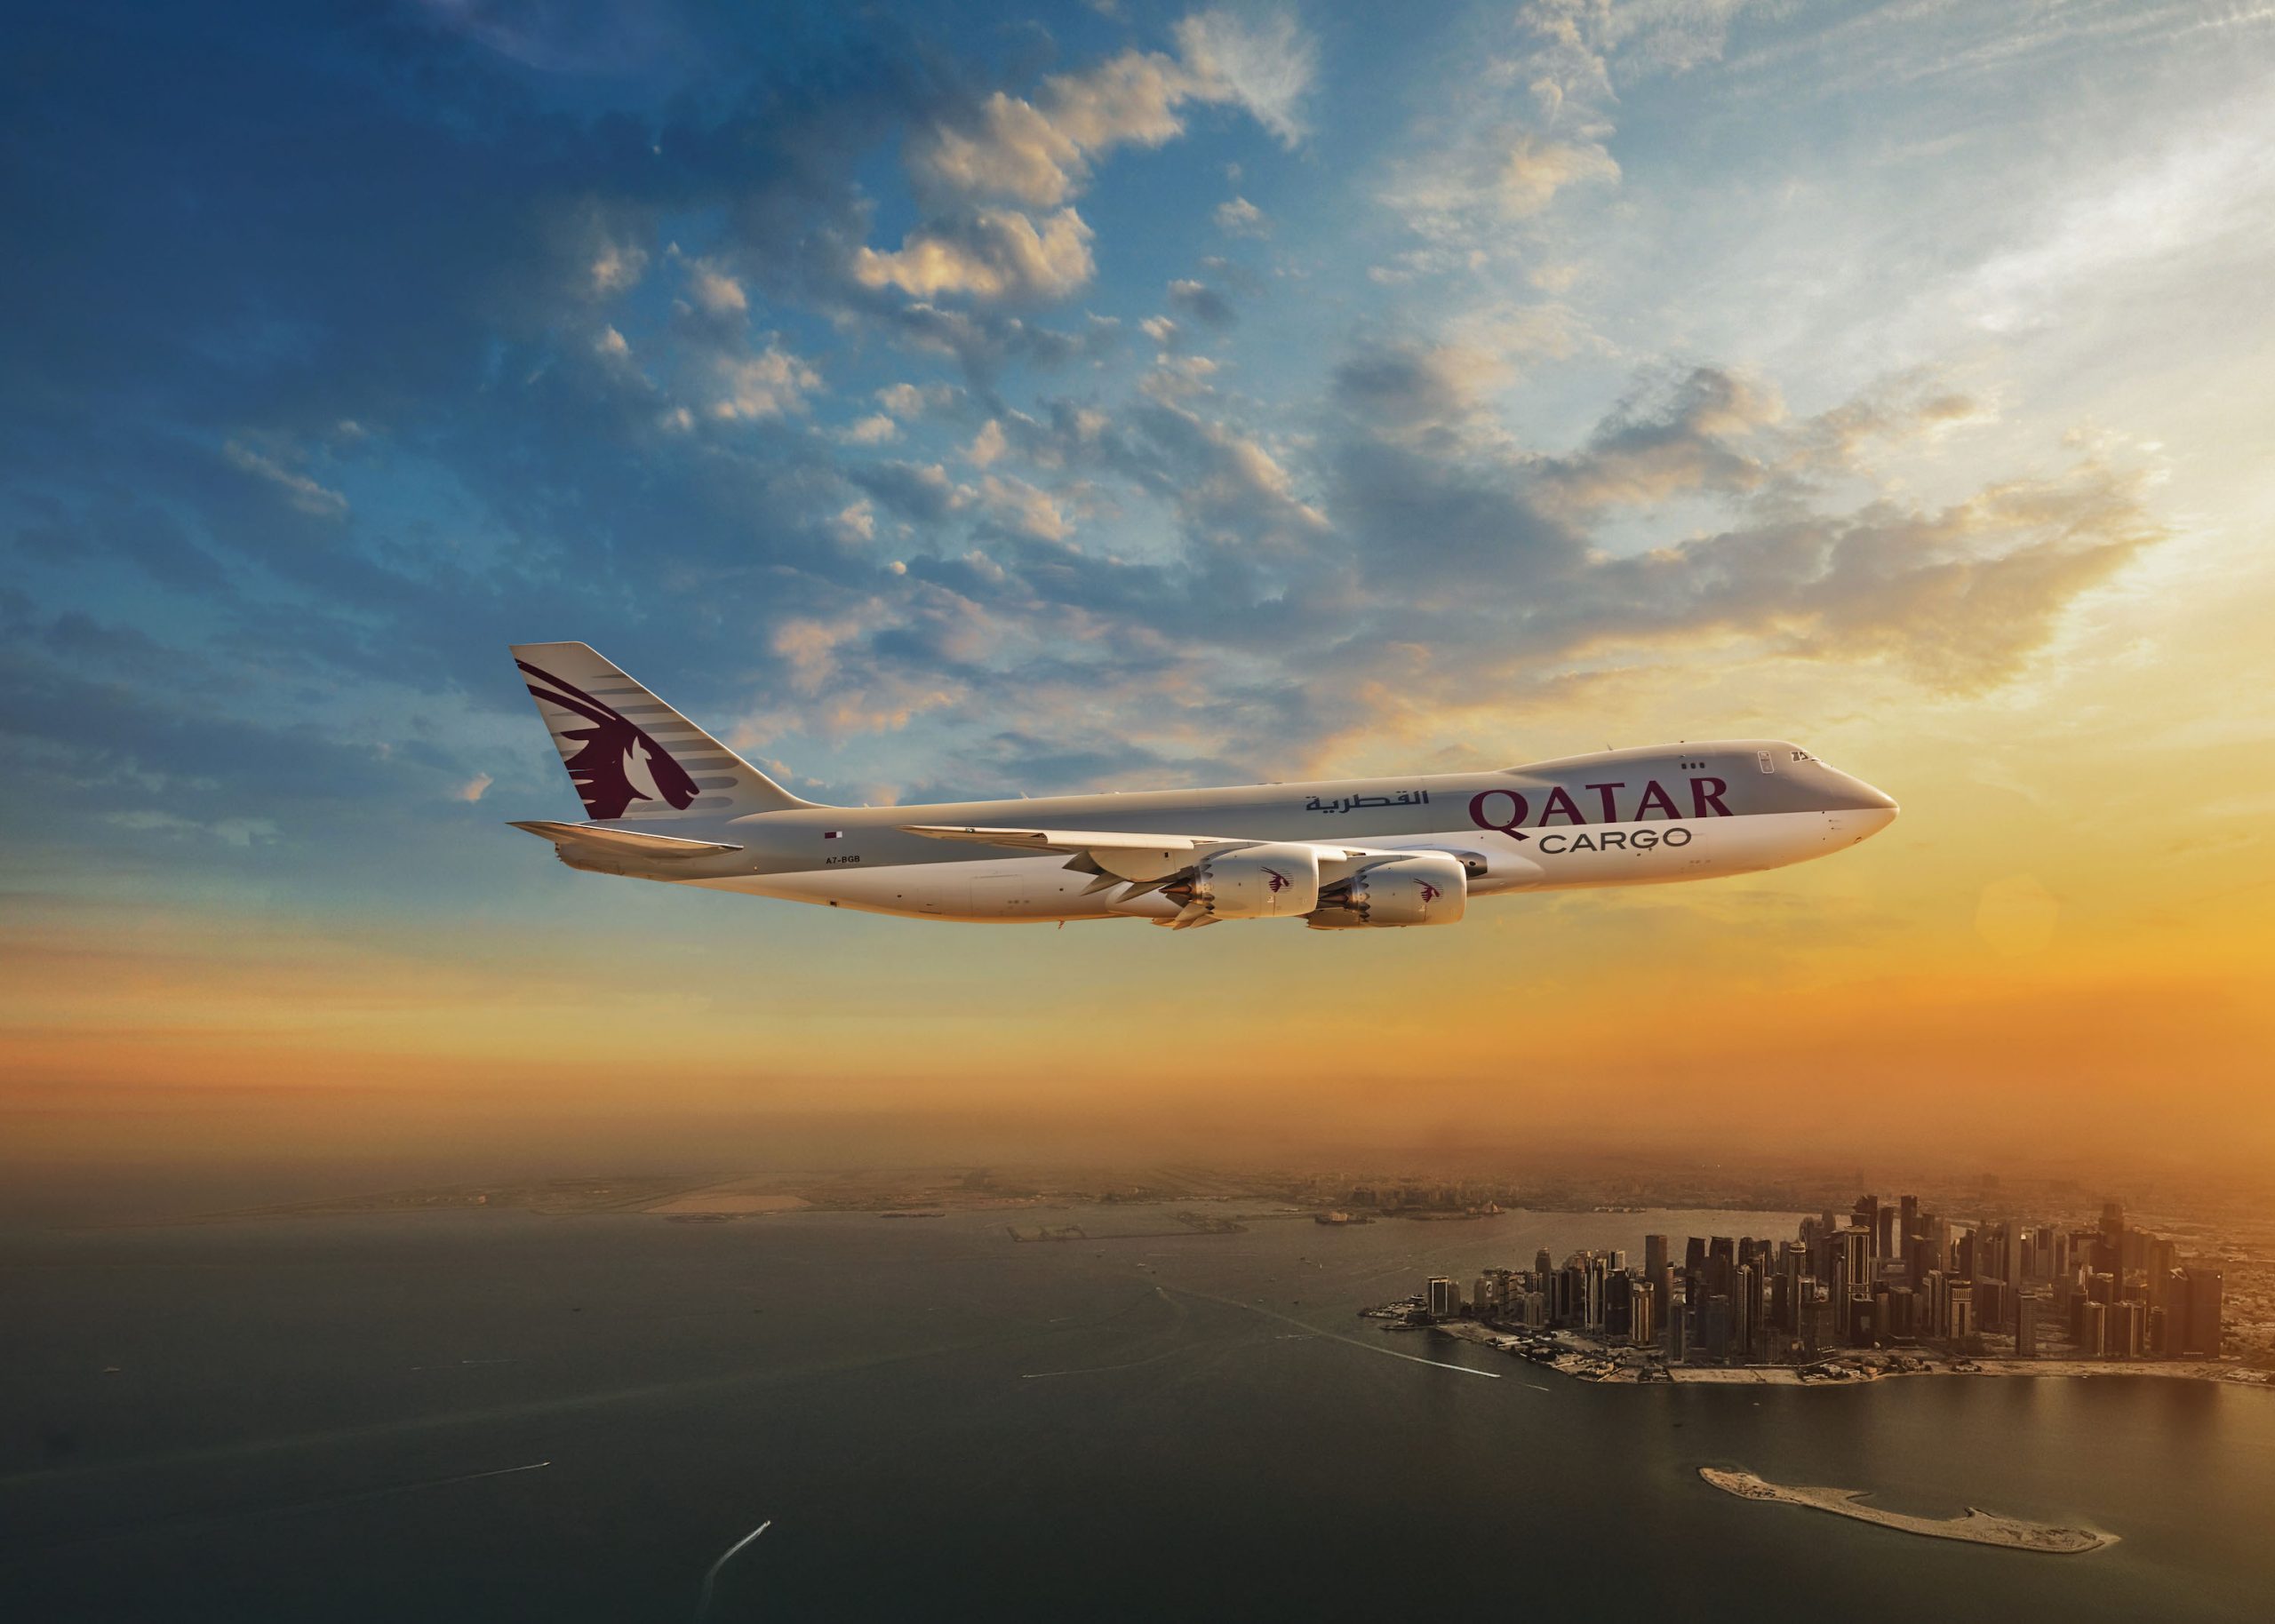 Qatar Airways partners with UNHCR to deliver aid for displaced globally